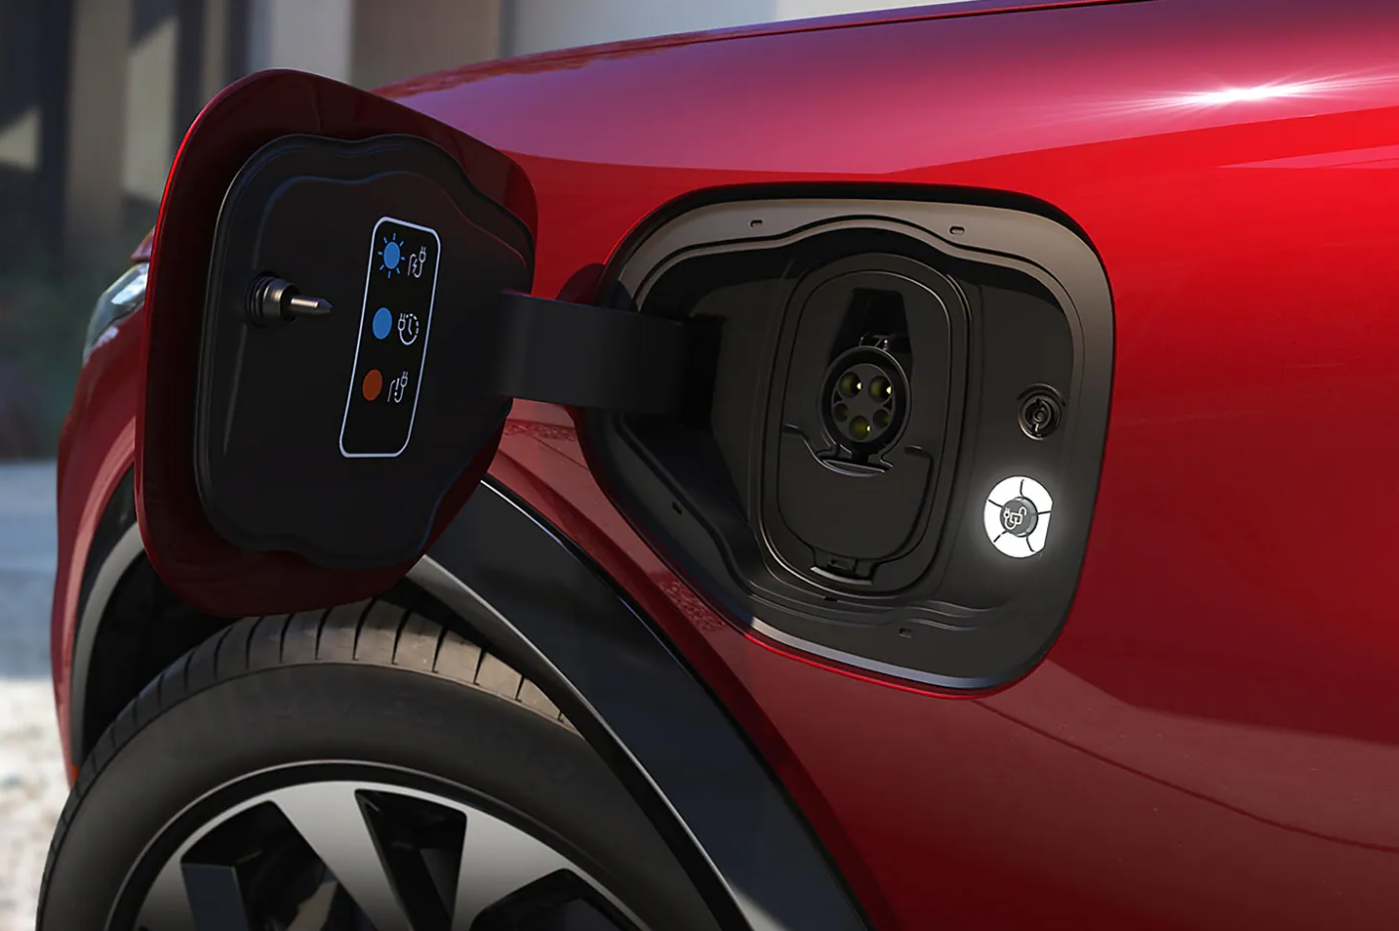 The charging port door on a red 2022 Ford Mach-E is opened and revealing the charging port on the side of the vehicle